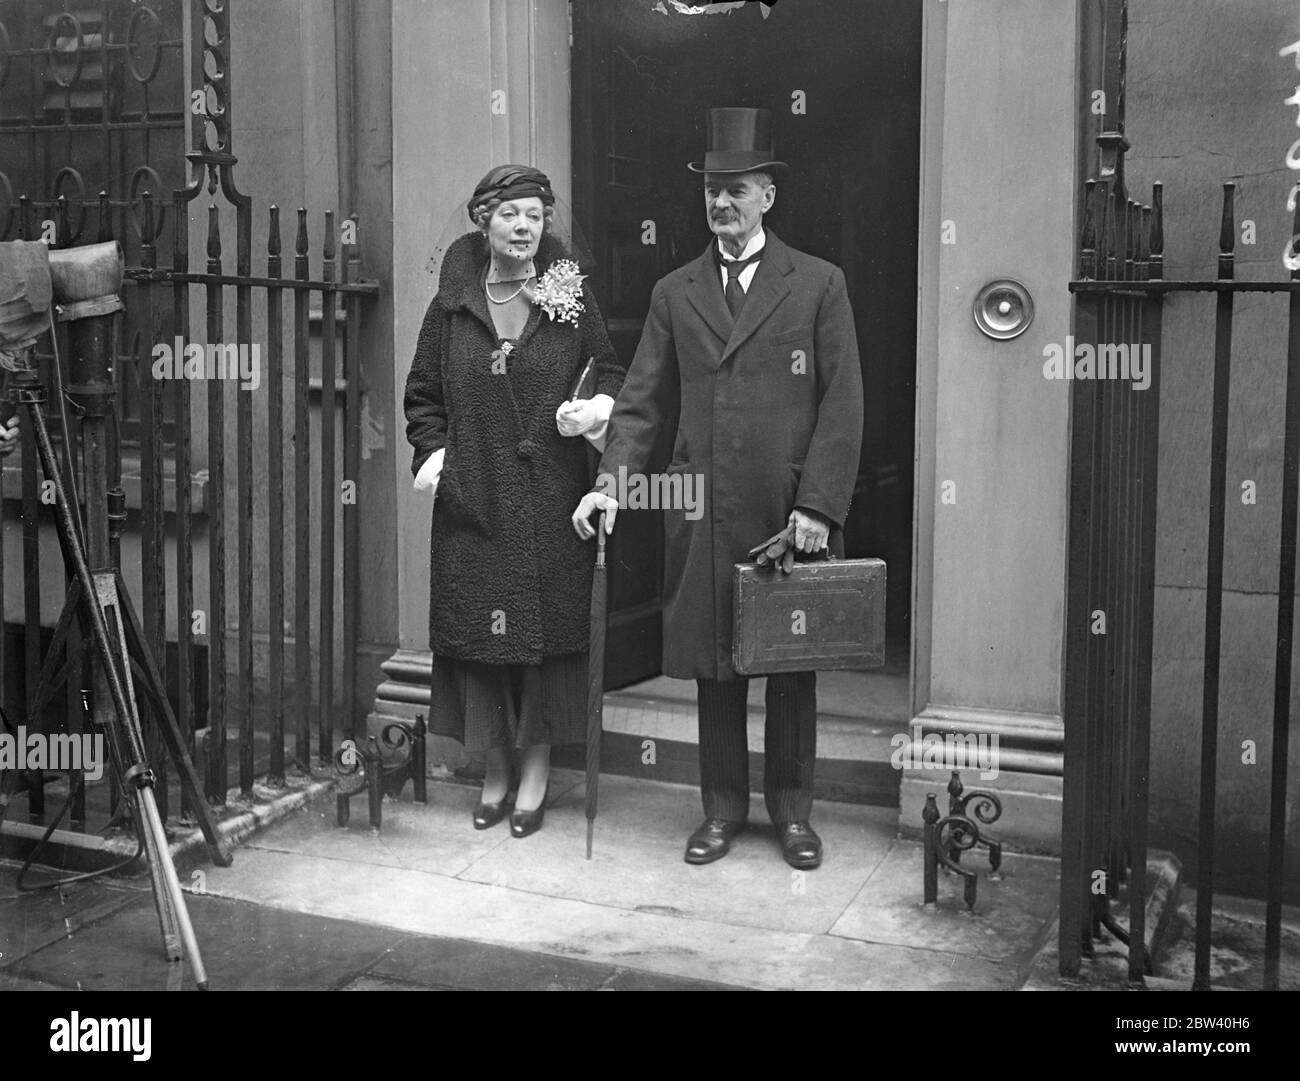 Mr Chamberlain leaves Downing Street to make budget speech. Mr Neville Chamberlain, the Chancellor of the Exchequer, let number 11 Downing Street to make his budget speech in the House of Commons. Photo shows: Mr Neville Chamberlain leaving Downing Street accompanied by his wife with his secrets securely locked in the Budget Case. 20 April 1937 Stock Photo